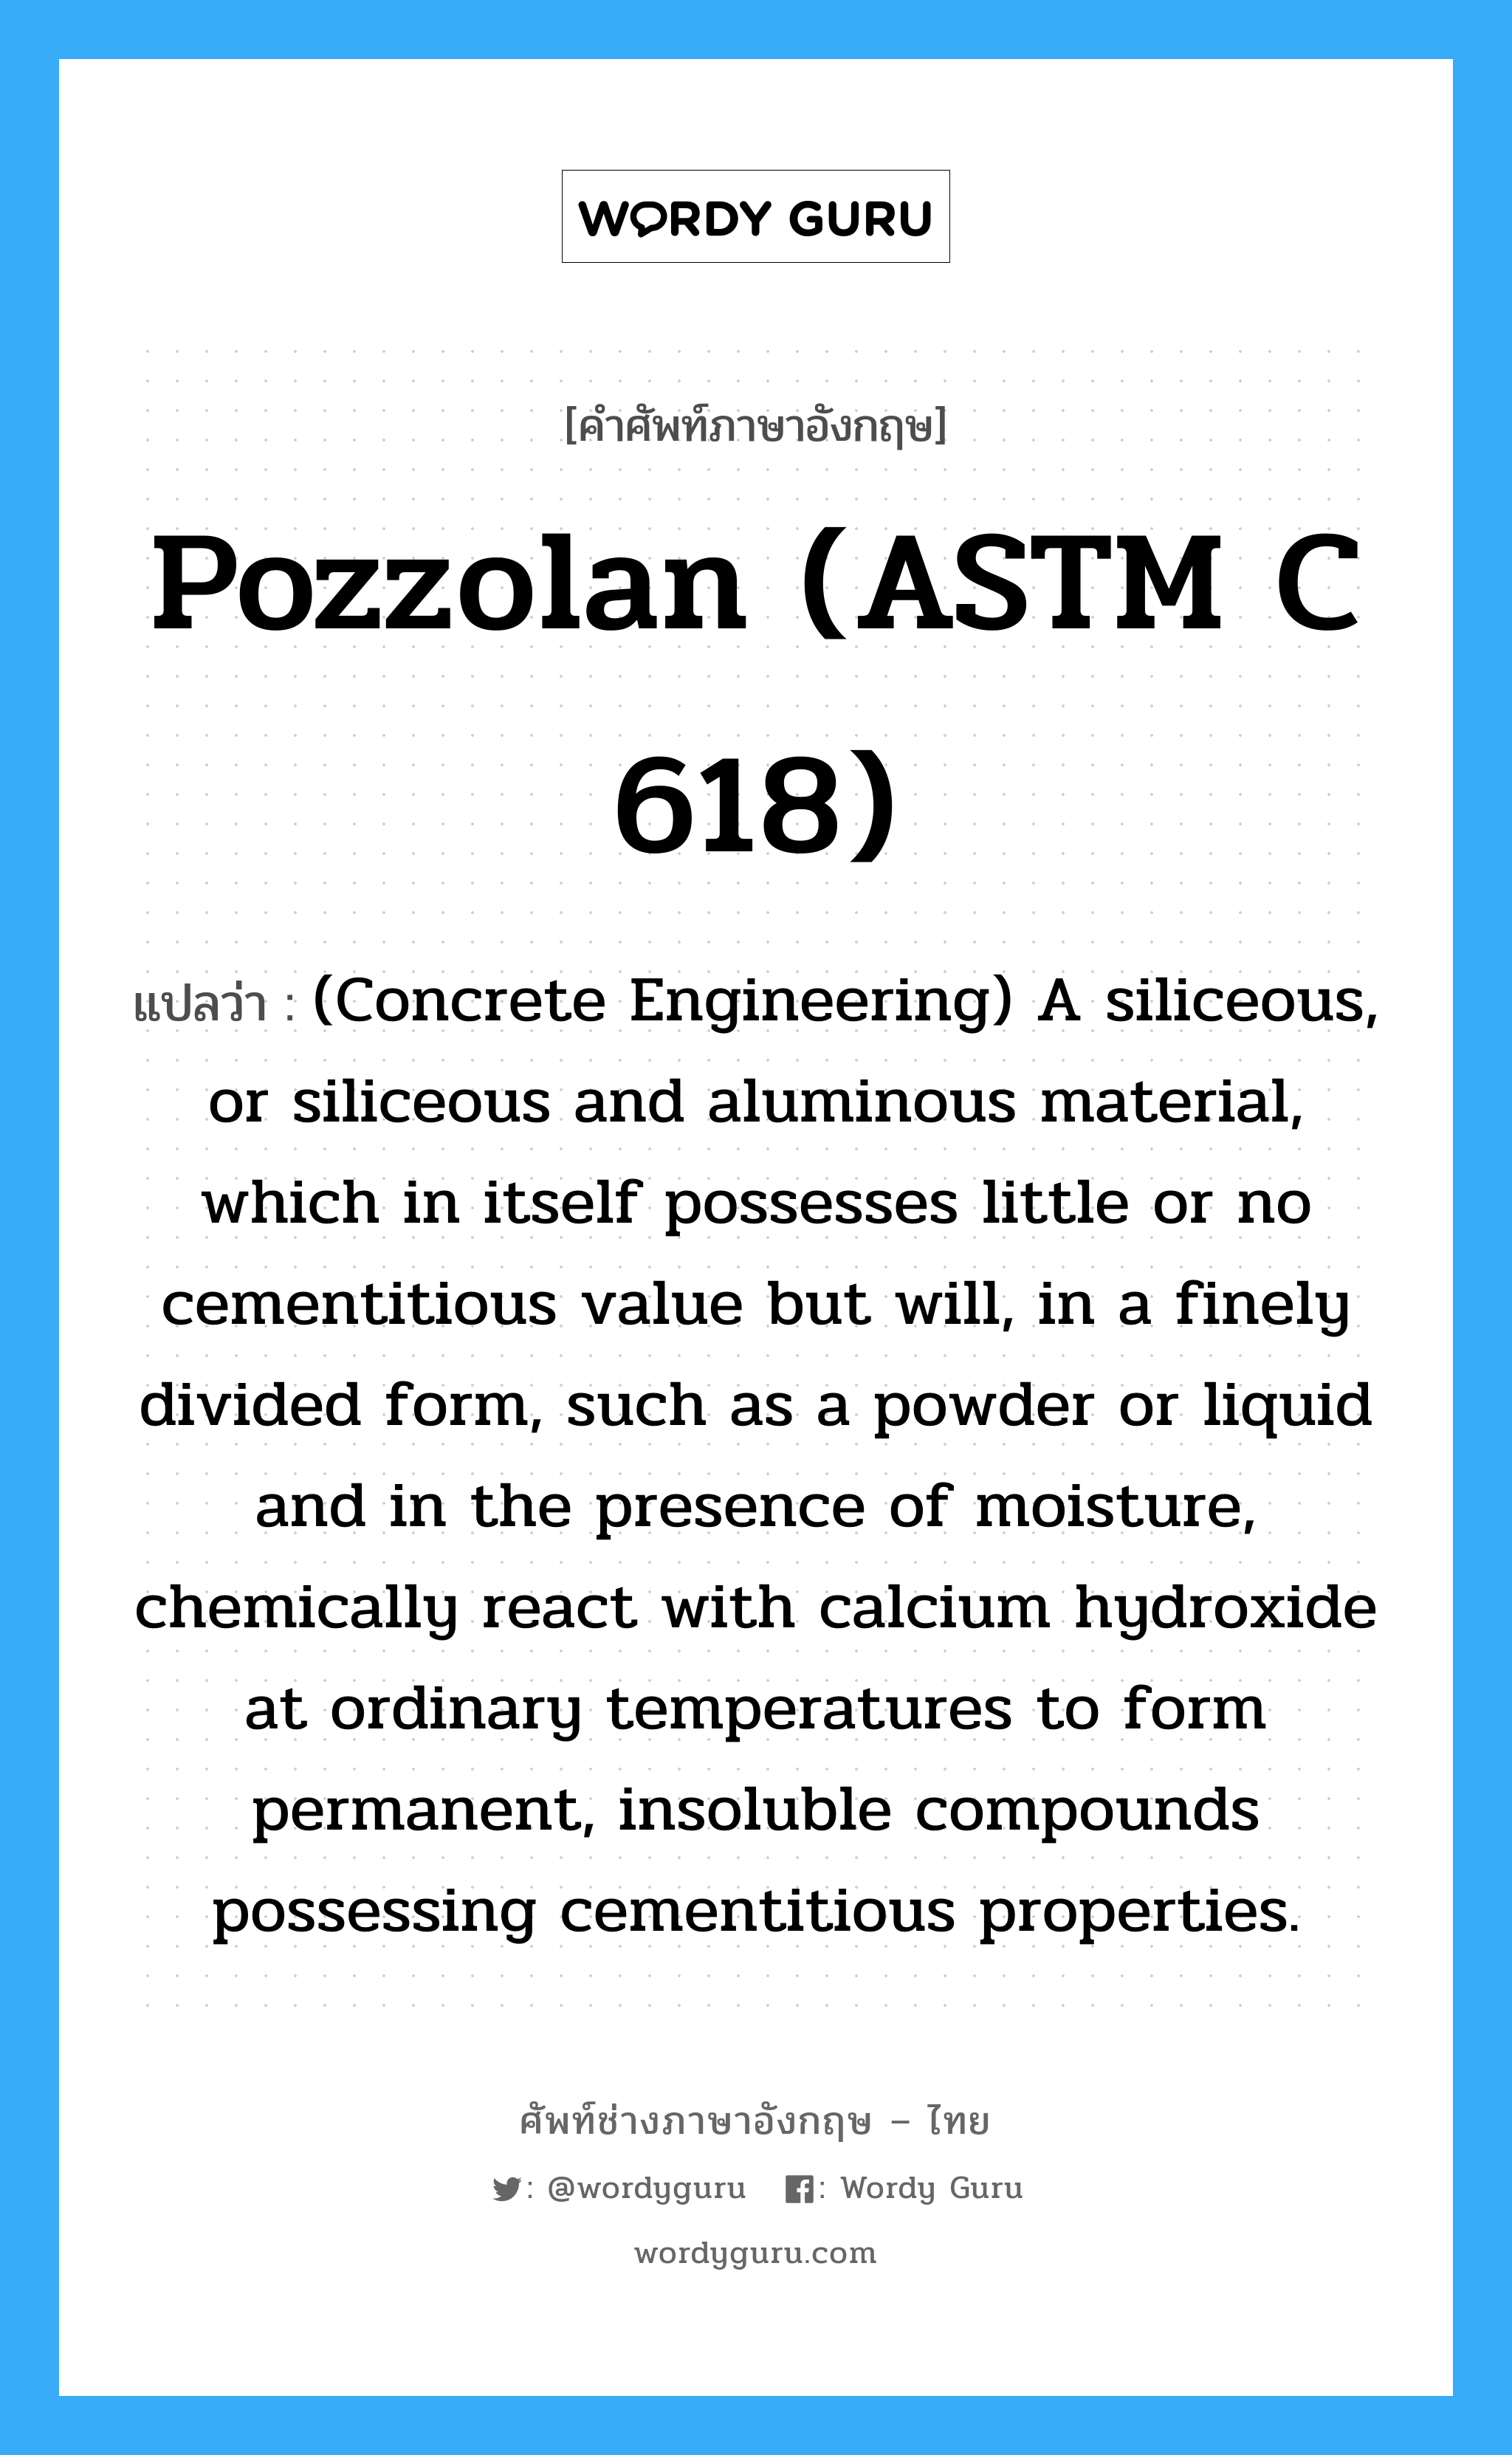 Pozzolan (ASTM C 618) แปลว่า?, คำศัพท์ช่างภาษาอังกฤษ - ไทย Pozzolan (ASTM C 618) คำศัพท์ภาษาอังกฤษ Pozzolan (ASTM C 618) แปลว่า (Concrete Engineering) A siliceous, or siliceous and aluminous material, which in itself possesses little or no cementitious value but will, in a finely divided form, such as a powder or liquid and in the presence of moisture, chemically react with calcium hydroxide at ordinary temperatures to form permanent, insoluble compounds possessing cementitious properties.